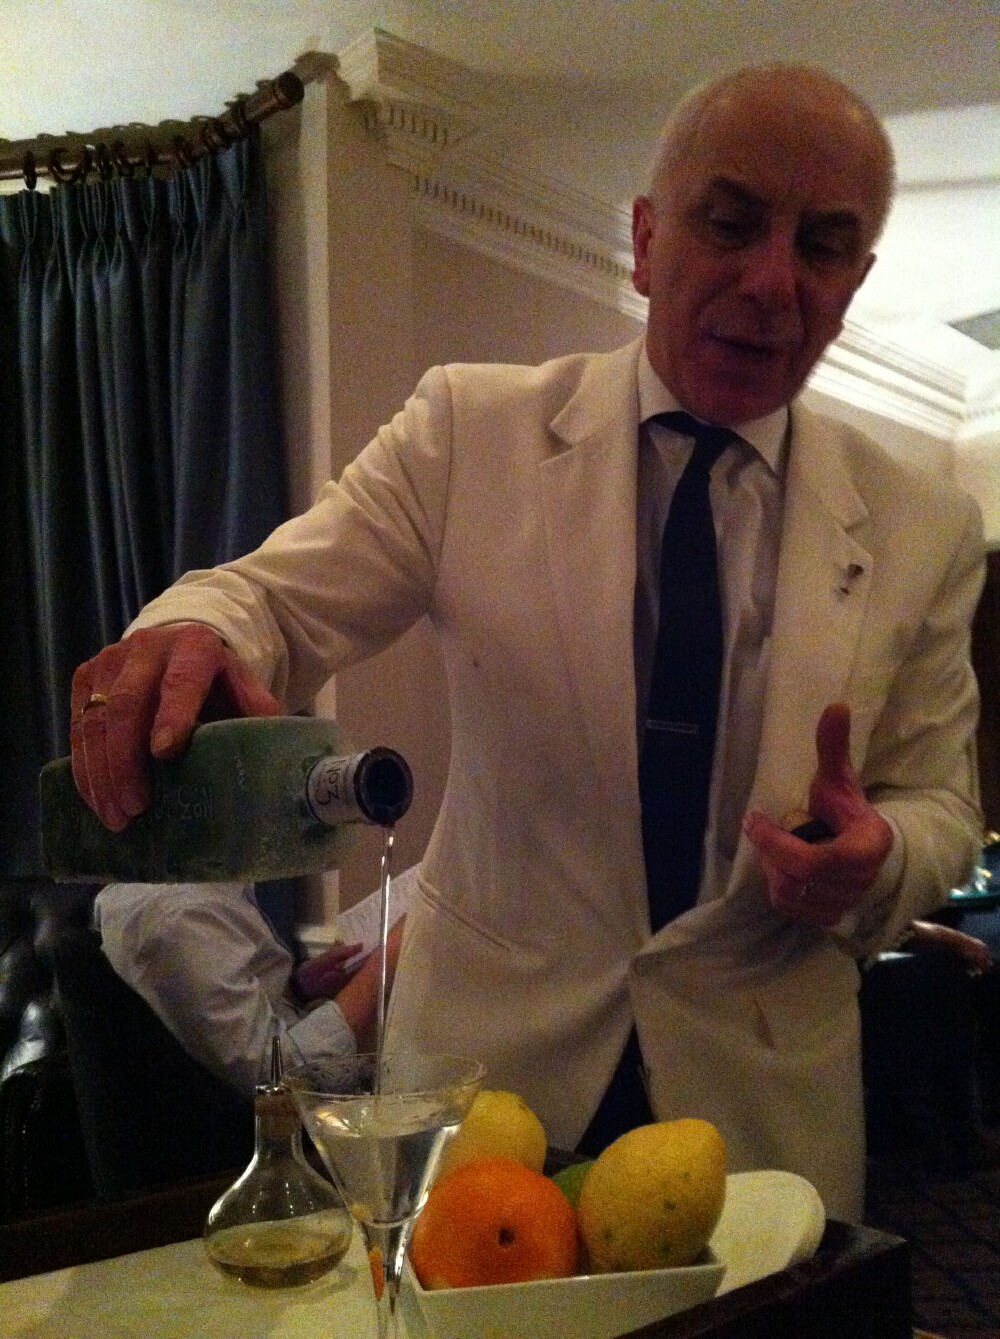 Alessandro Palazzi mixing a superb Martini cocktail at the Dukes in London